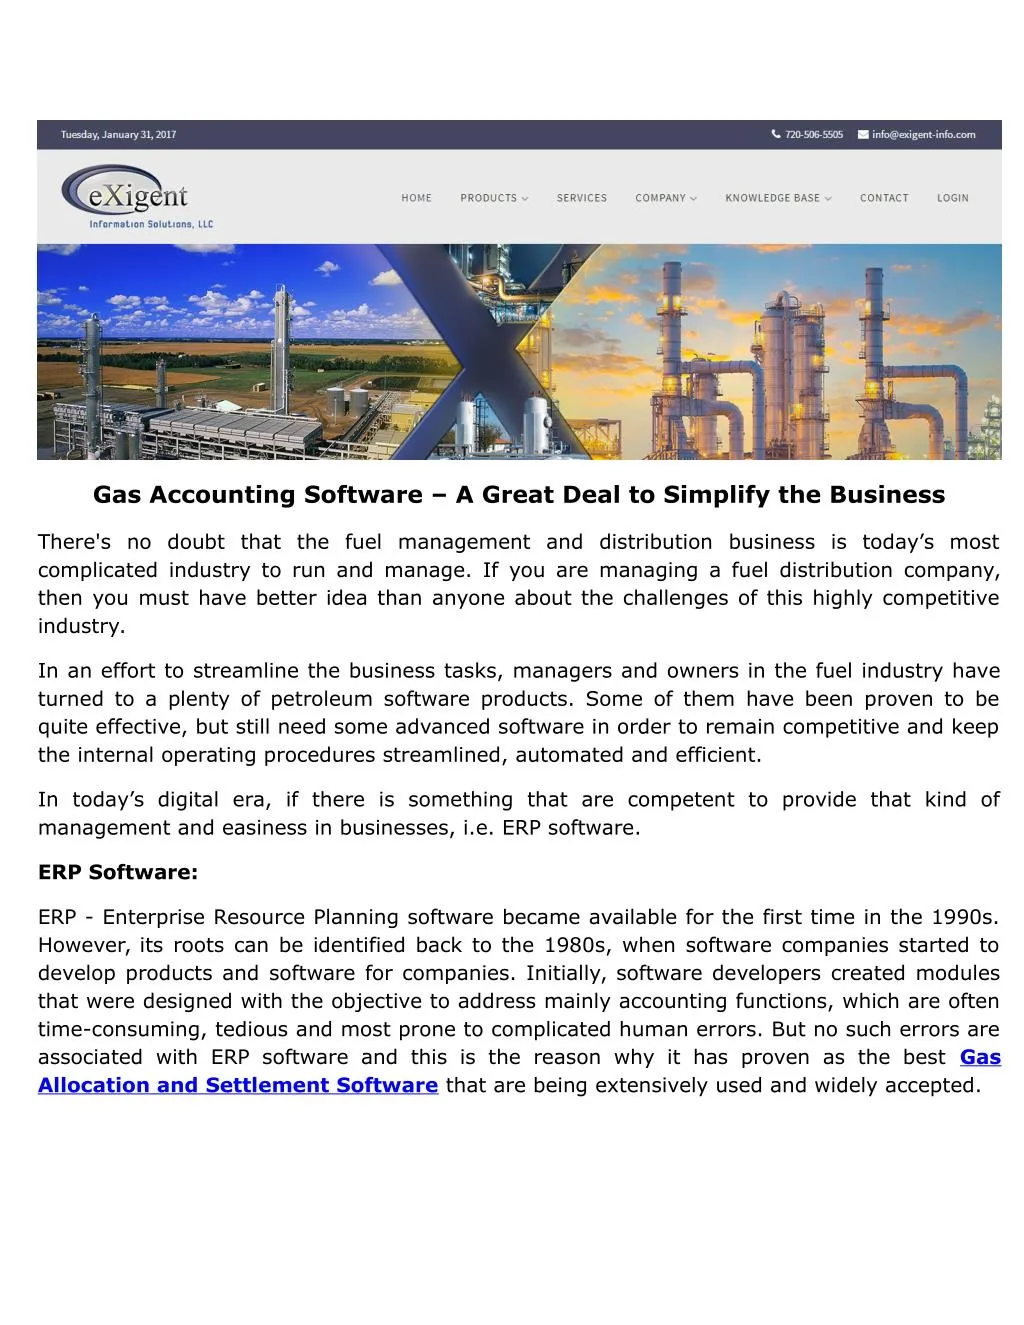 gas accounting software a great deal to simplify